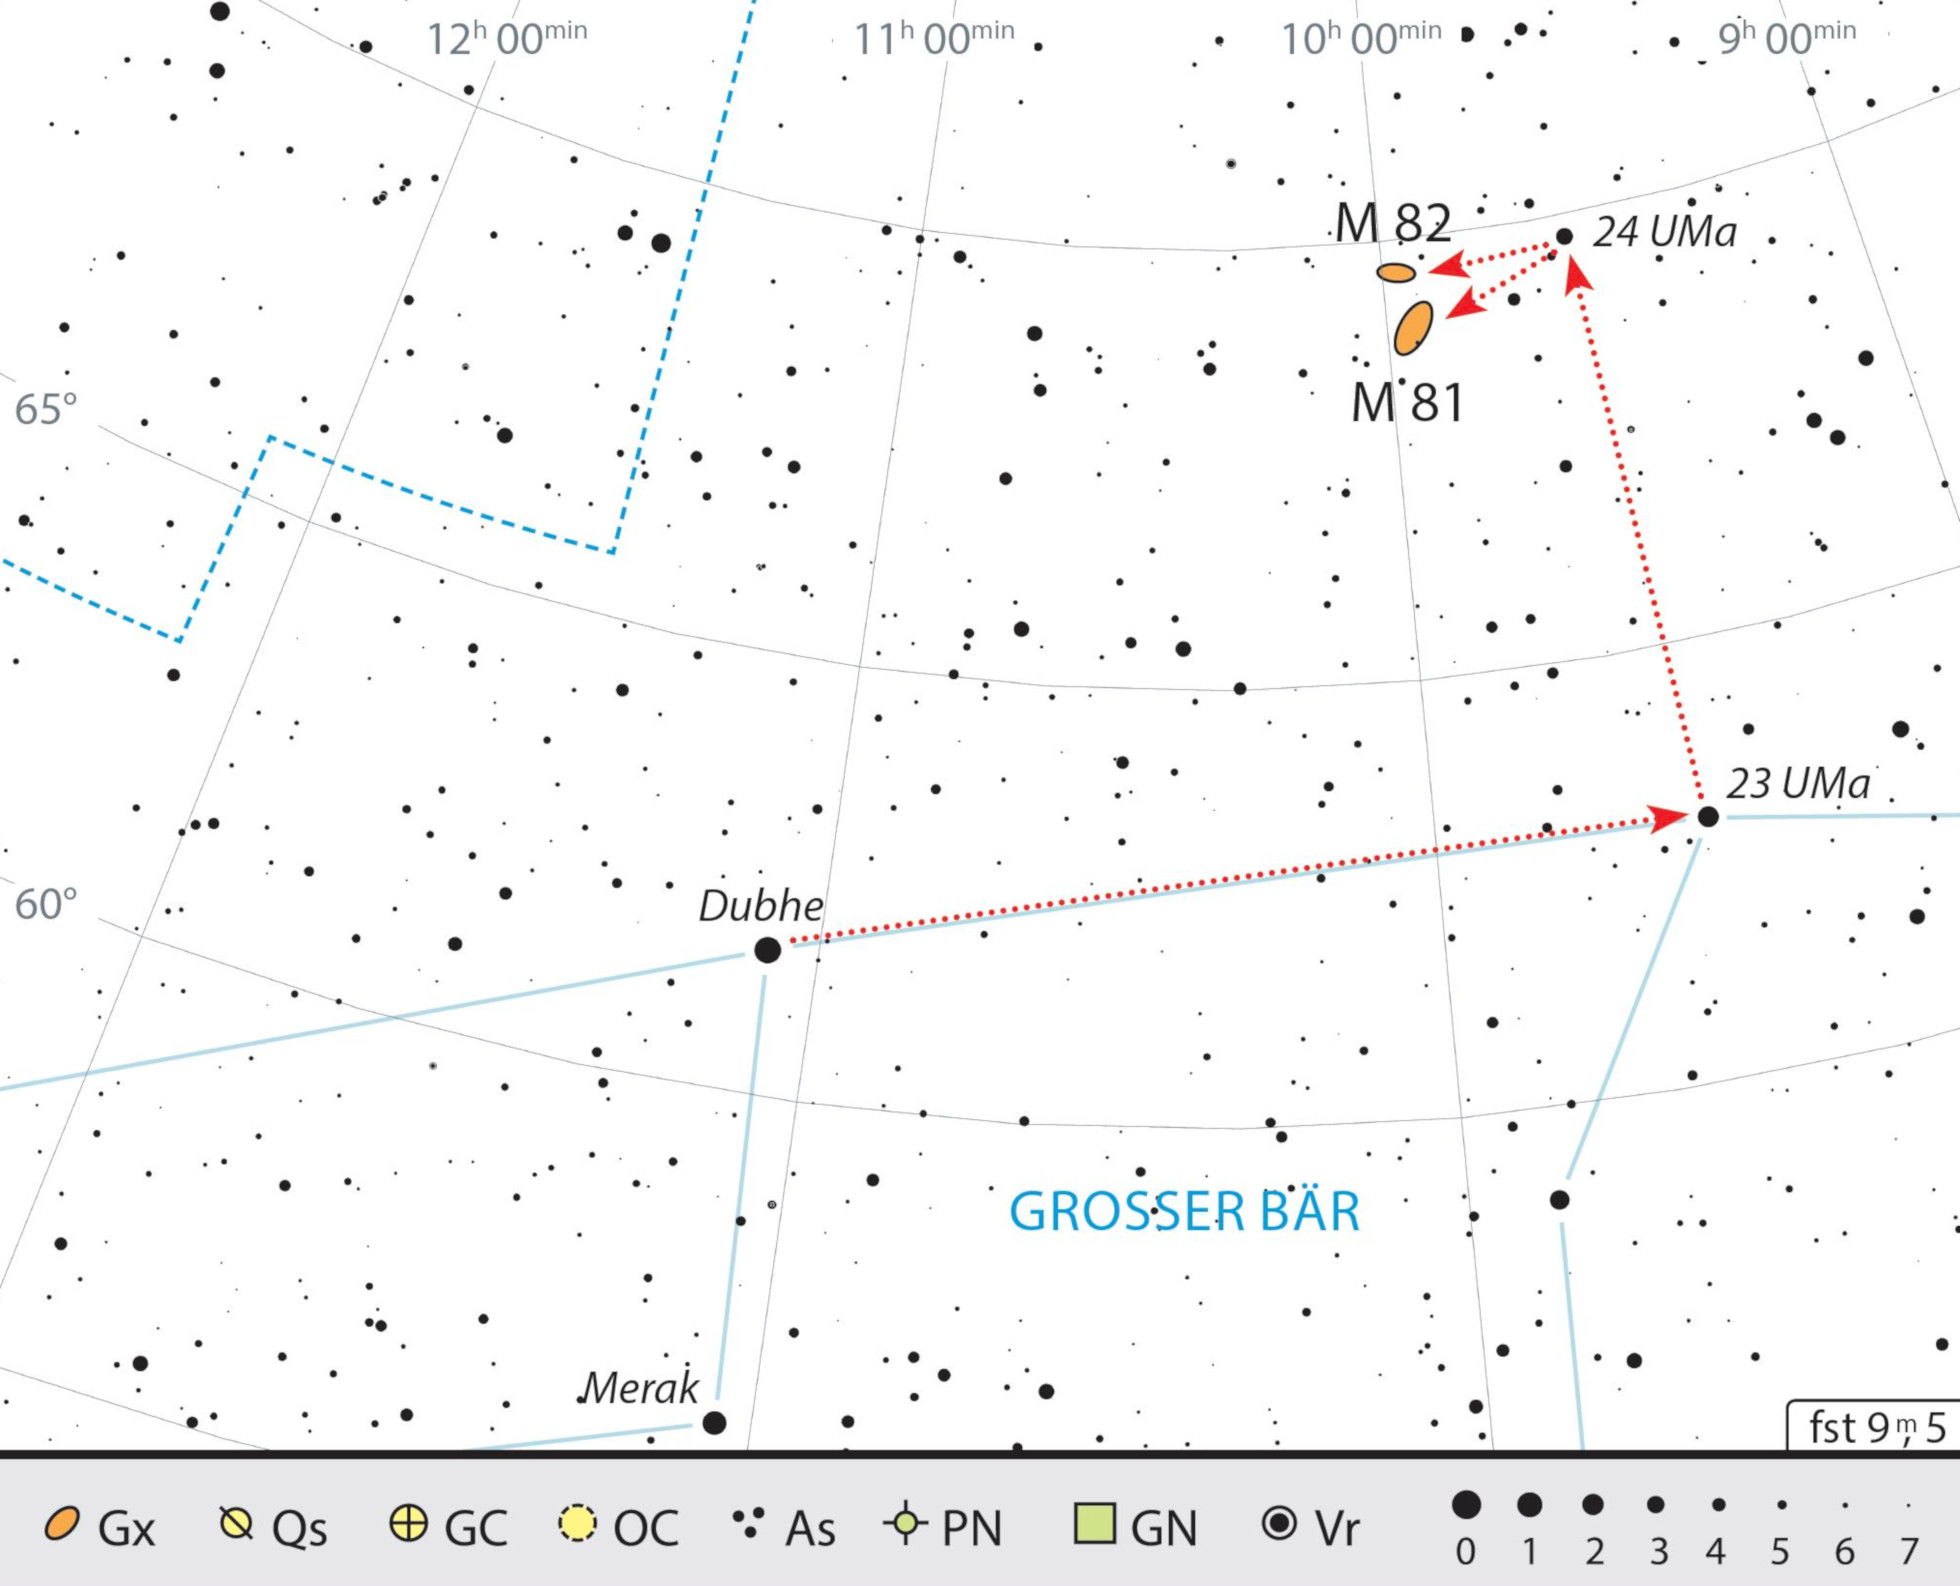 Finding chart of M81 and M82 in the constellation of Ursa Major. J. Scholten